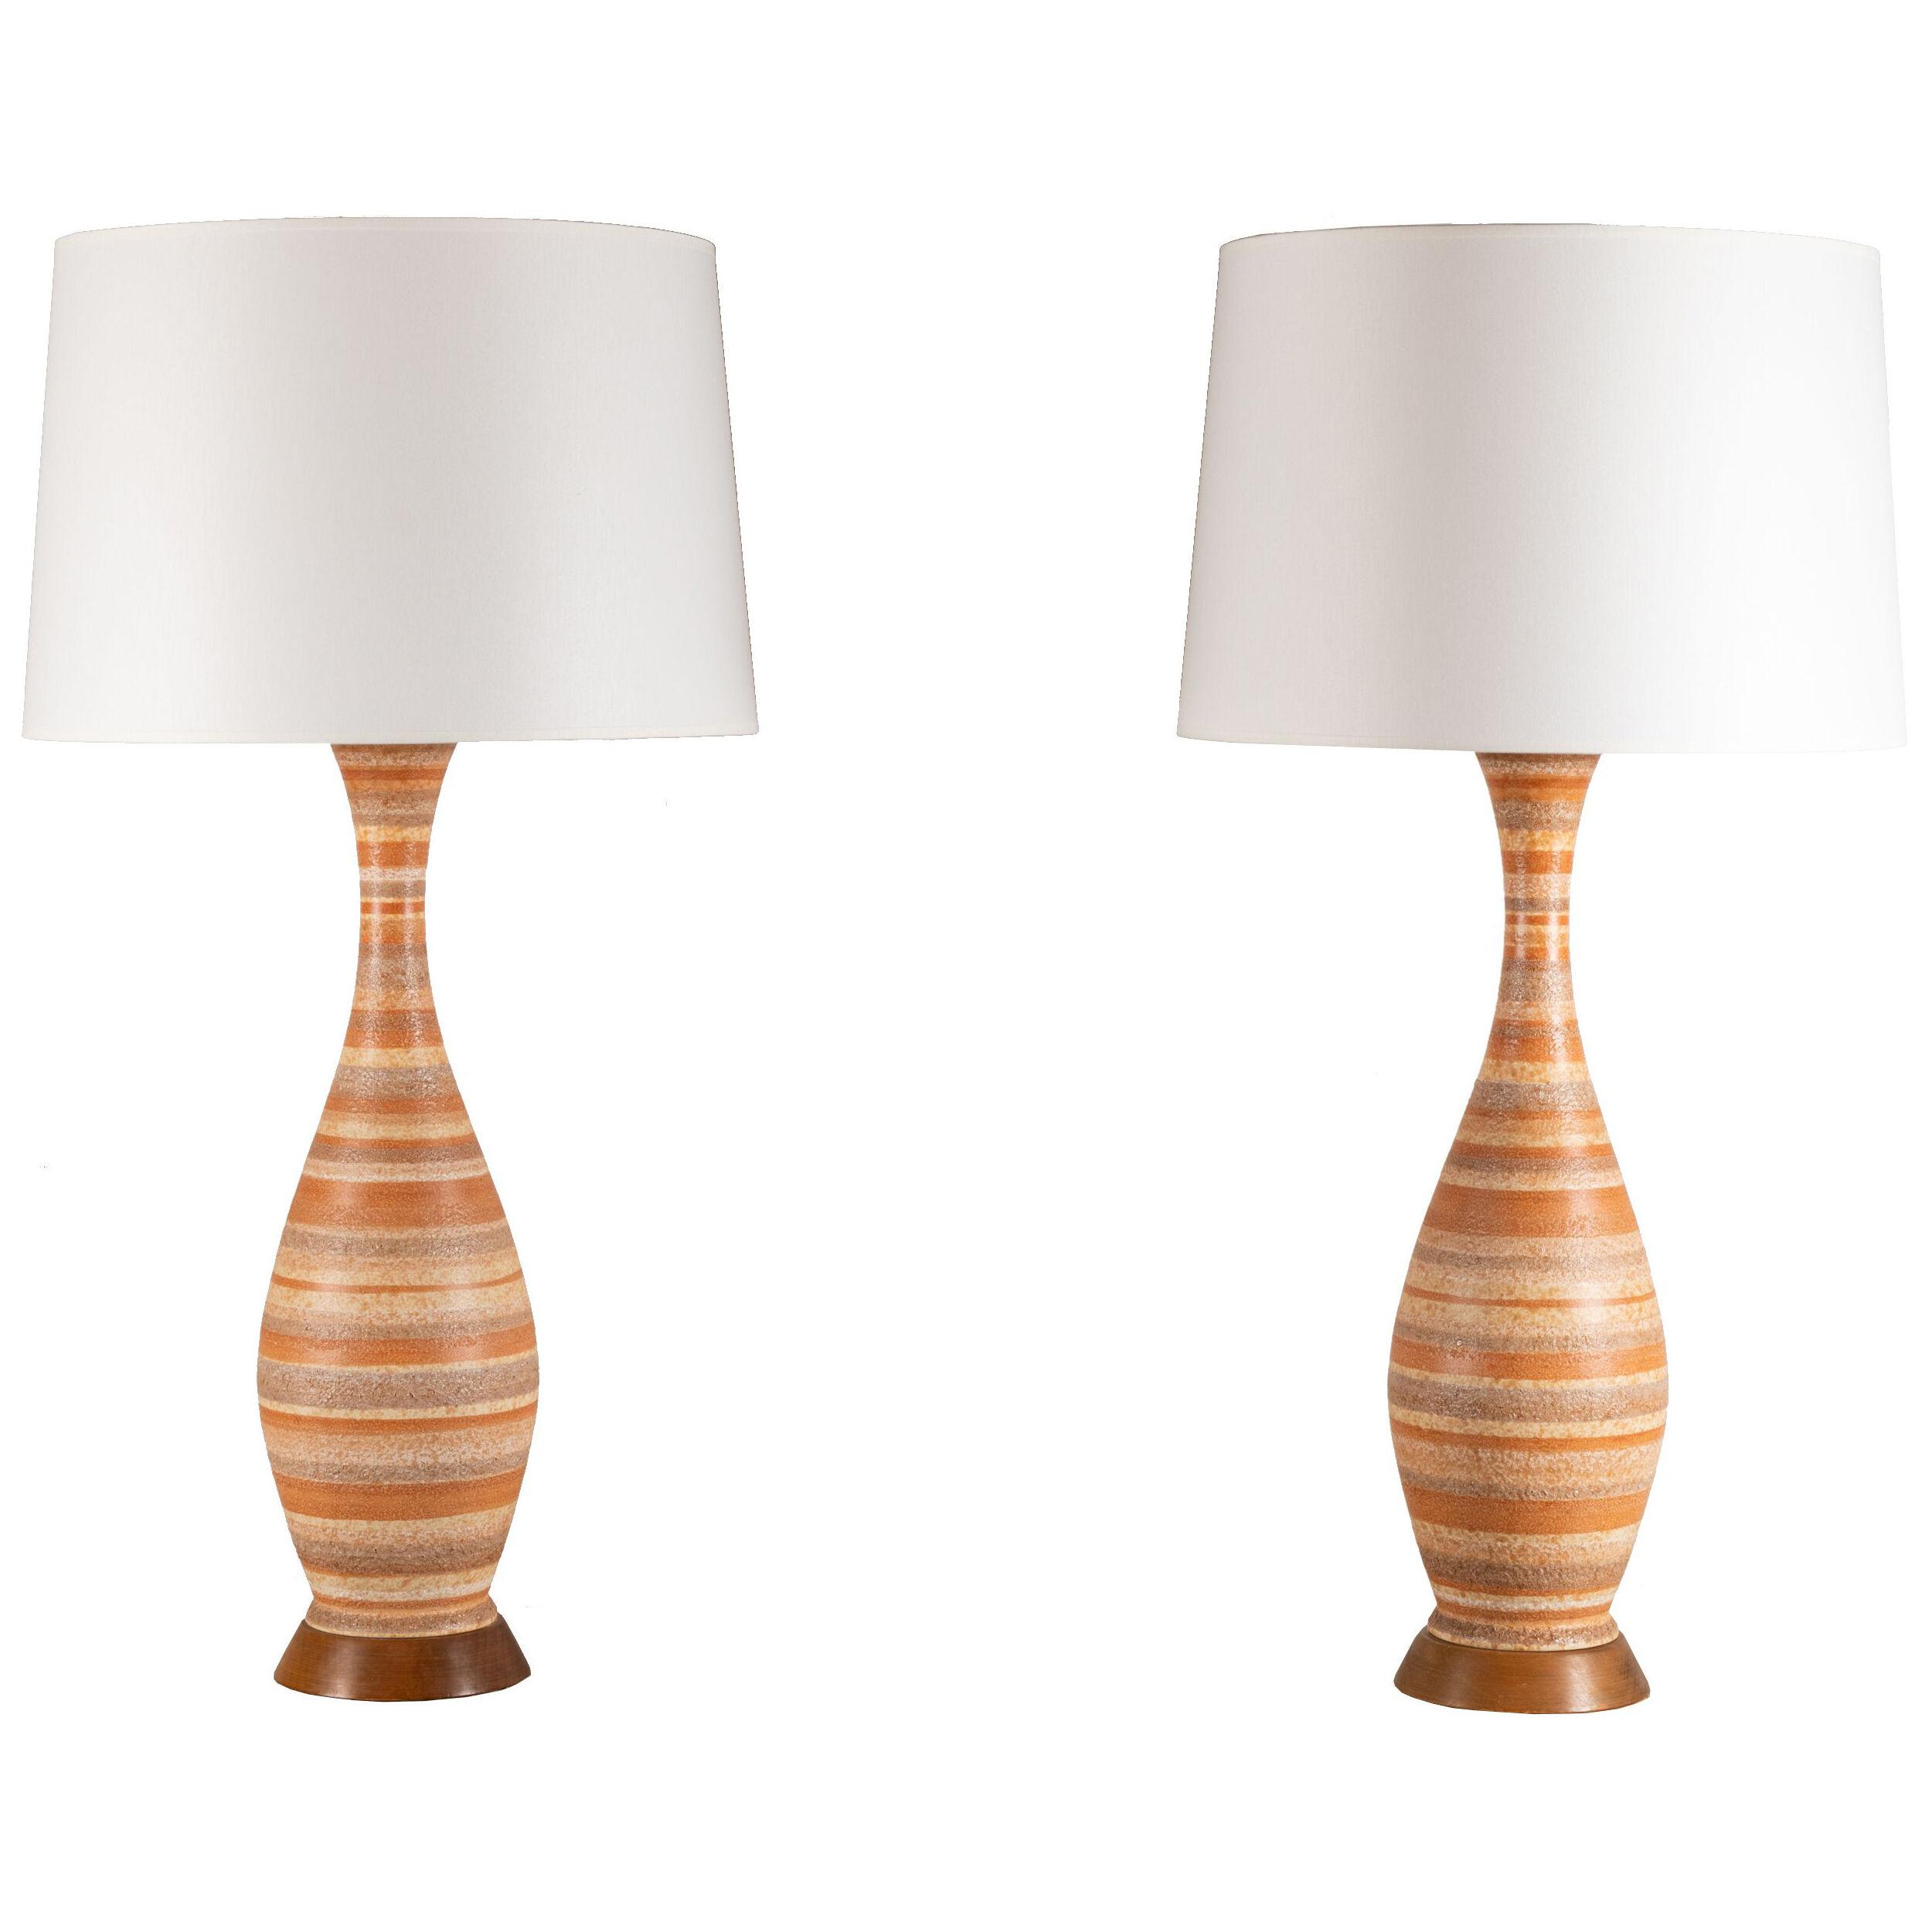 Pair of Ceramic Table Lamps, Italy 1950's